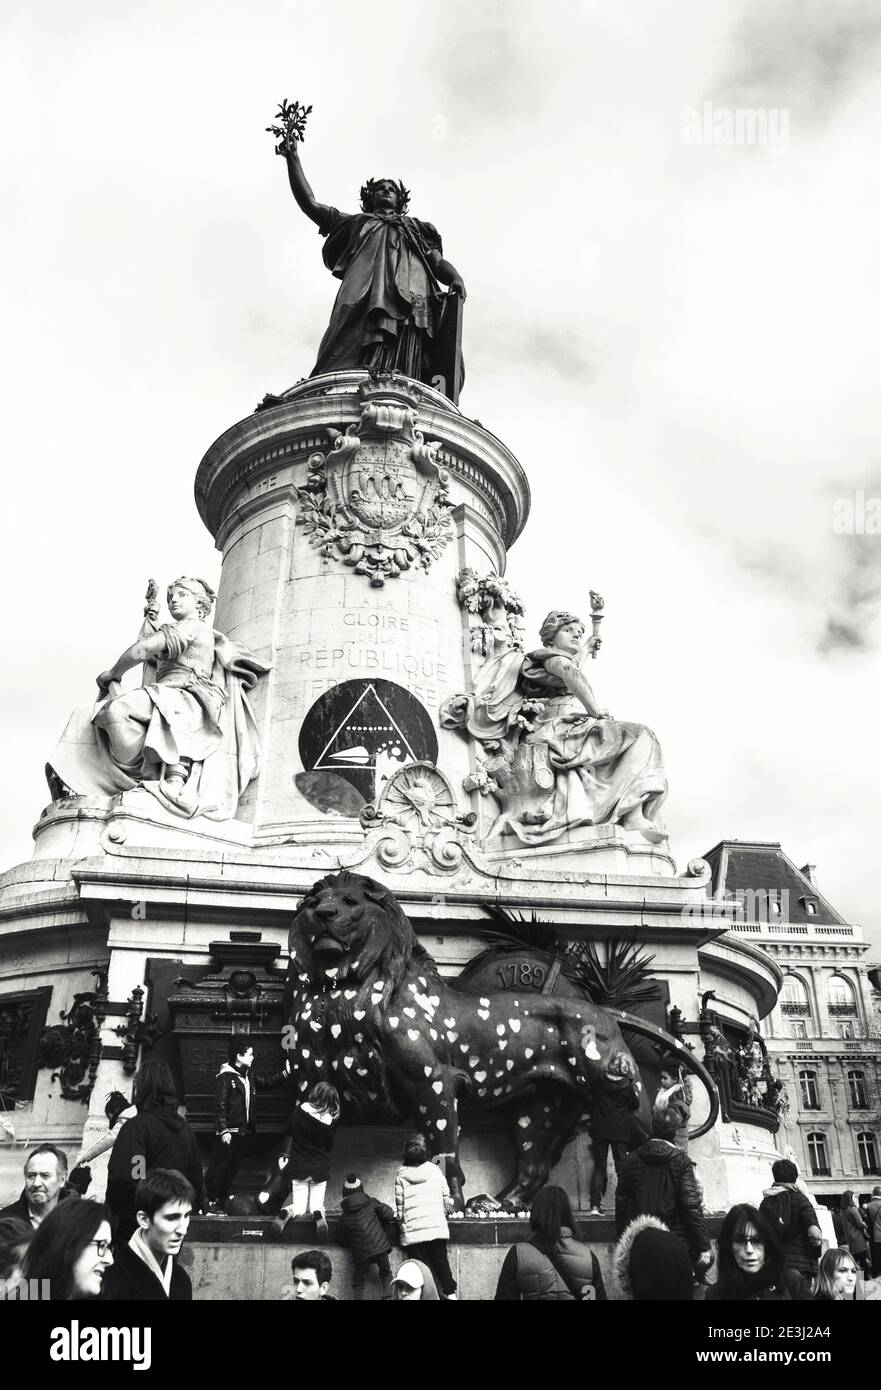 PARIS, FRANCE - JANUARY 28, 2017: Hearts with prayers for peace on lion beneath the Statue of Republique and playing children at Place de la Republiqu Stock Photo